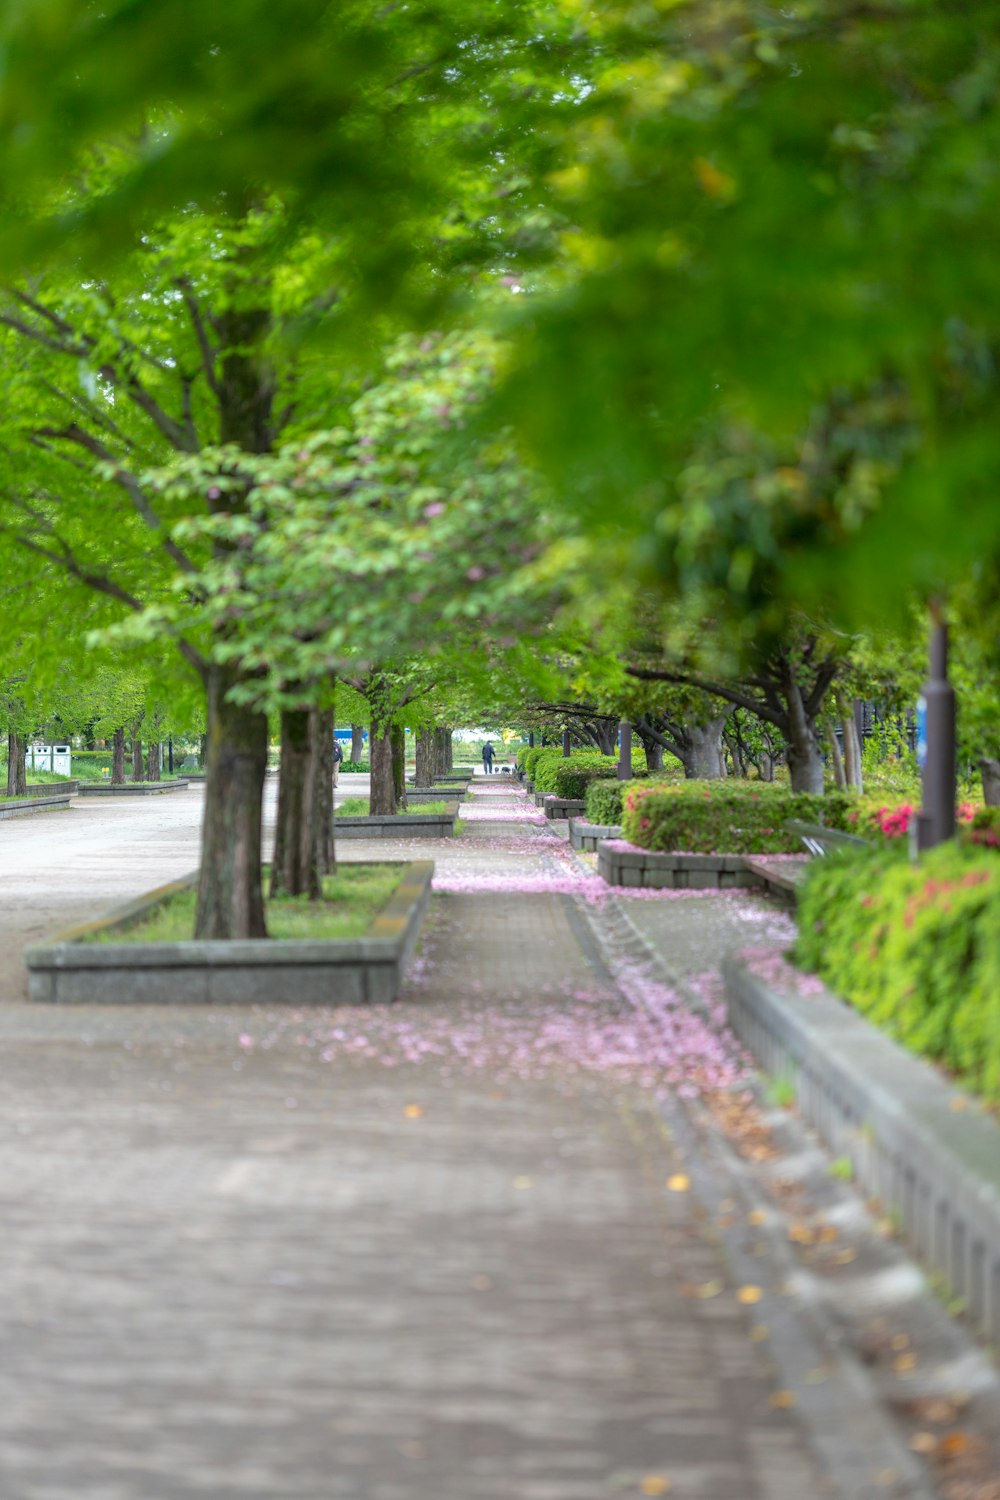 a park with benches, trees, and flowers on the ground